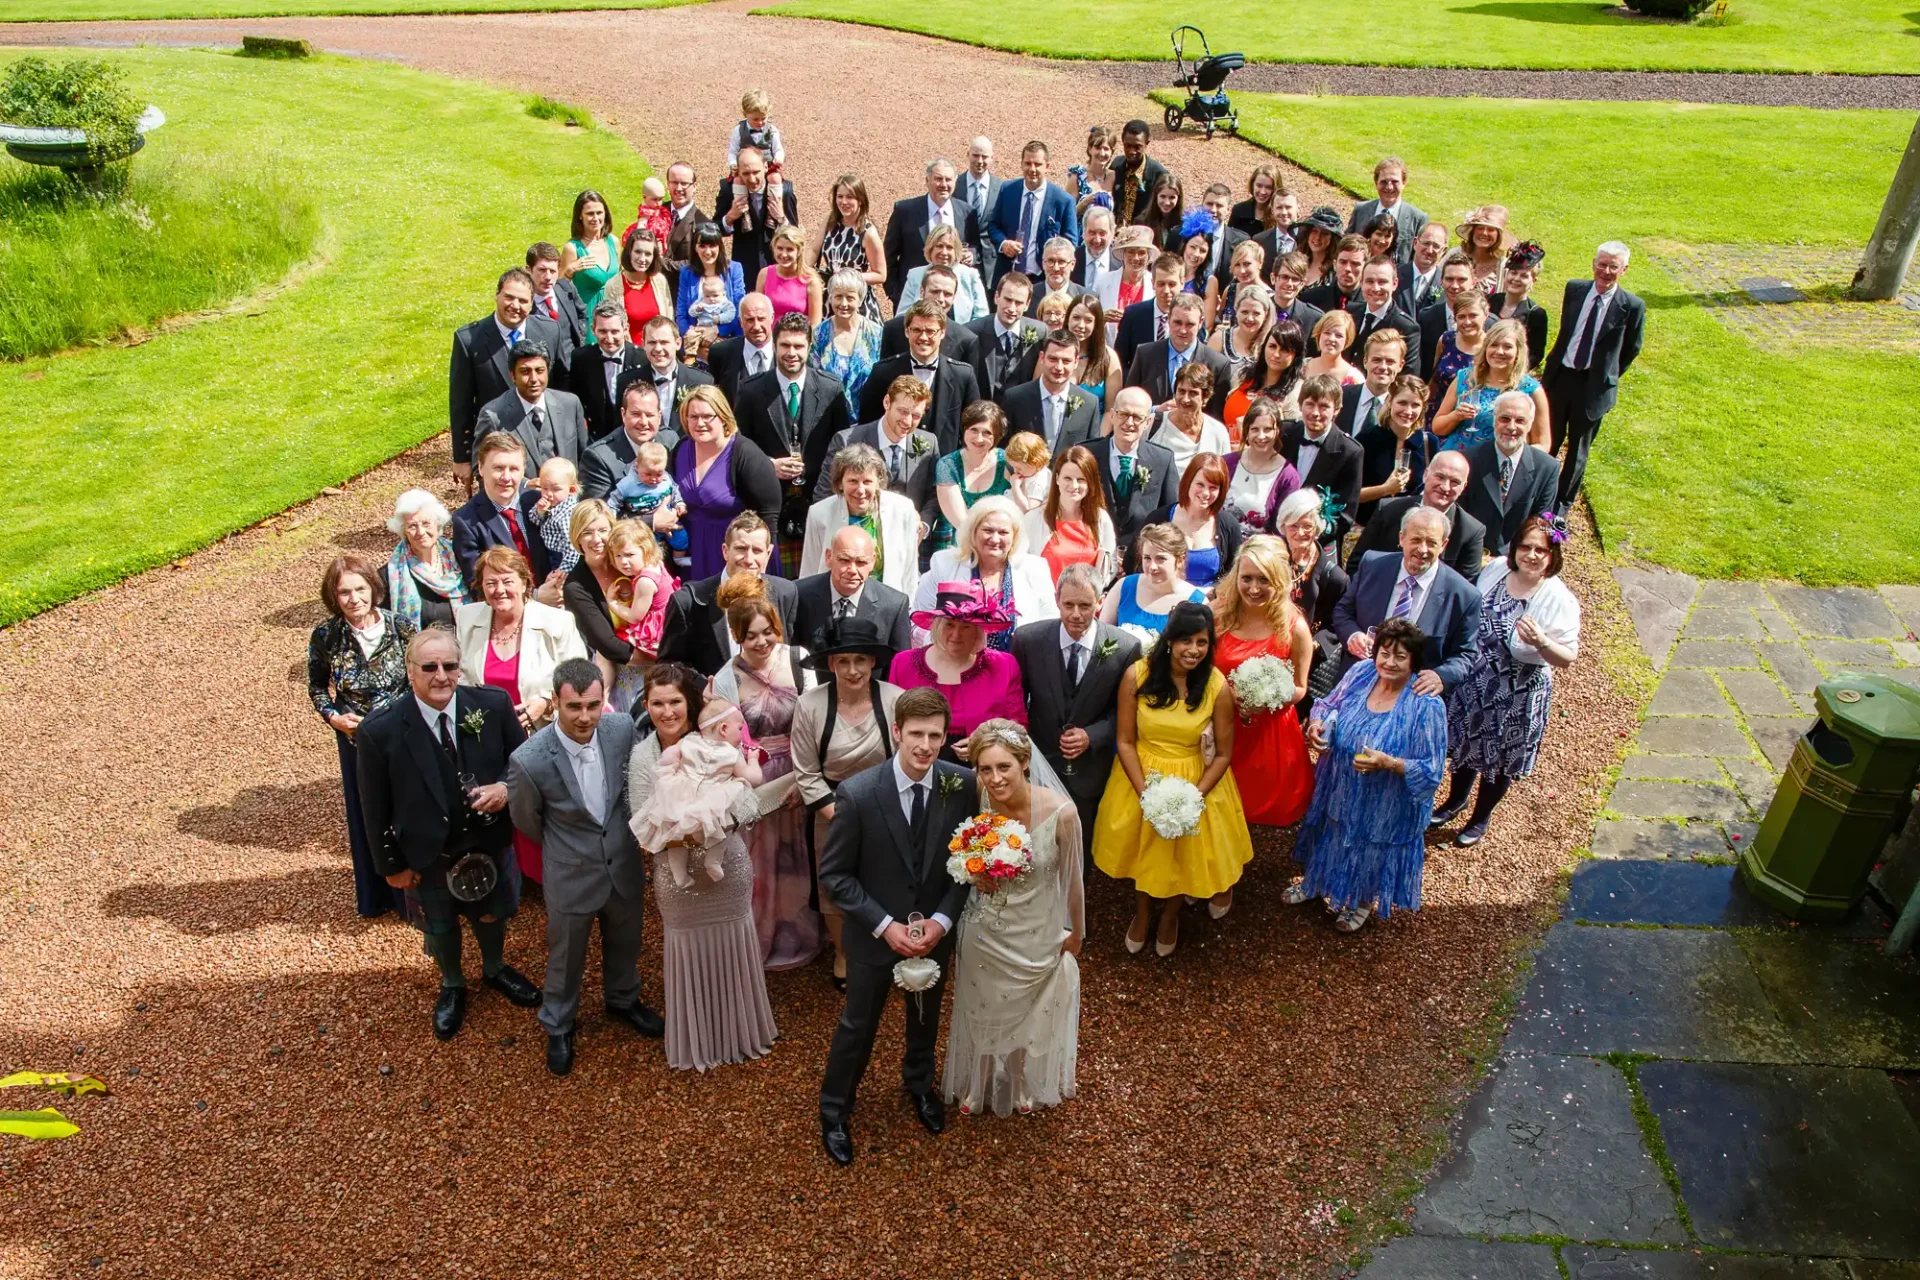 A large group of wedding guests, dressed formally, posing for a photo in a heart-shaped arrangement on a gravel courtyard with green lawns in the background.